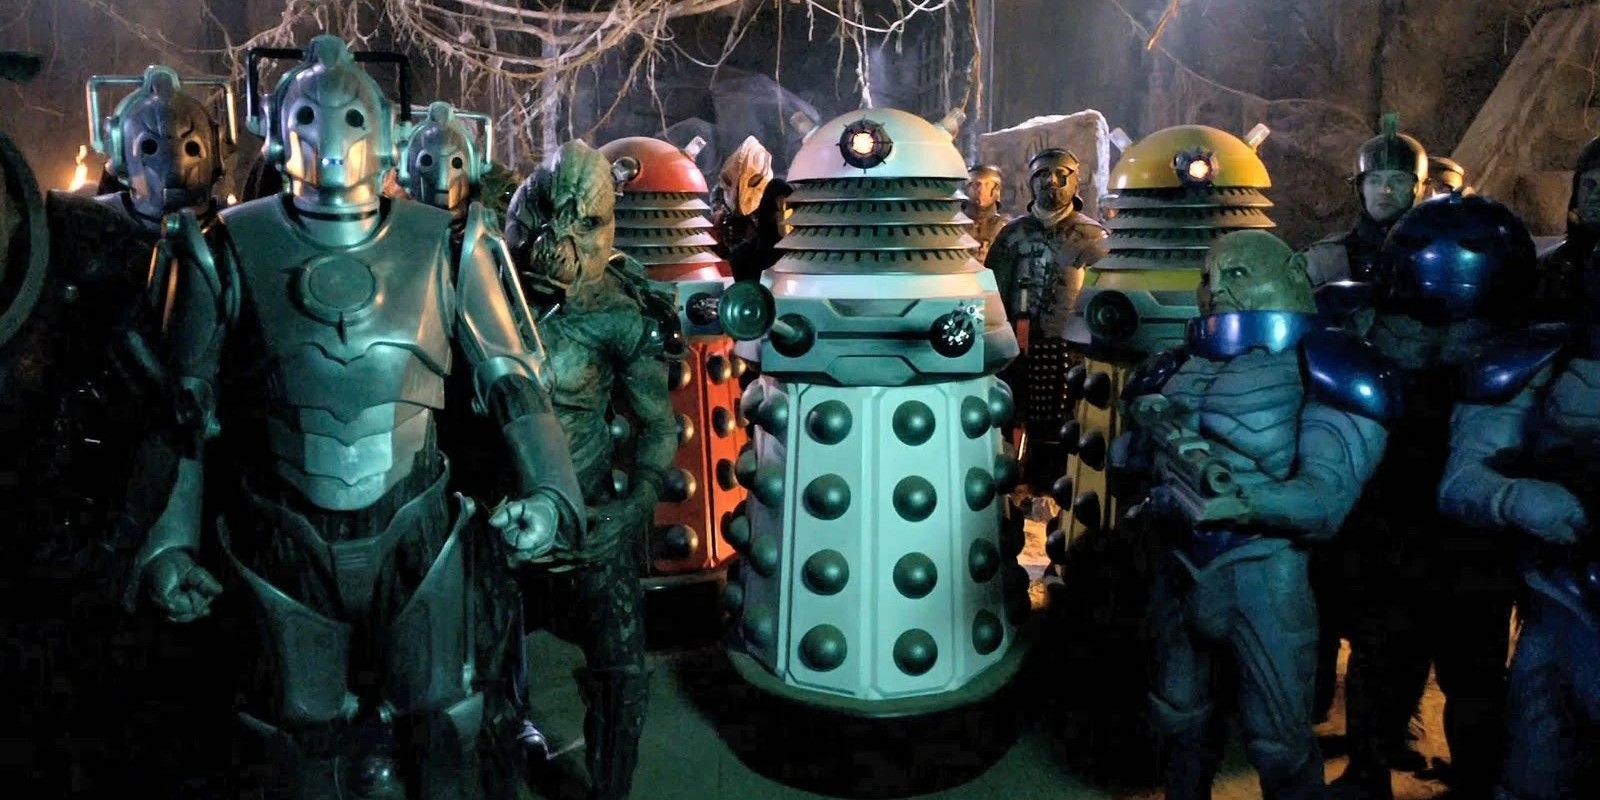 The Pandorica Alliance in Doctor Who